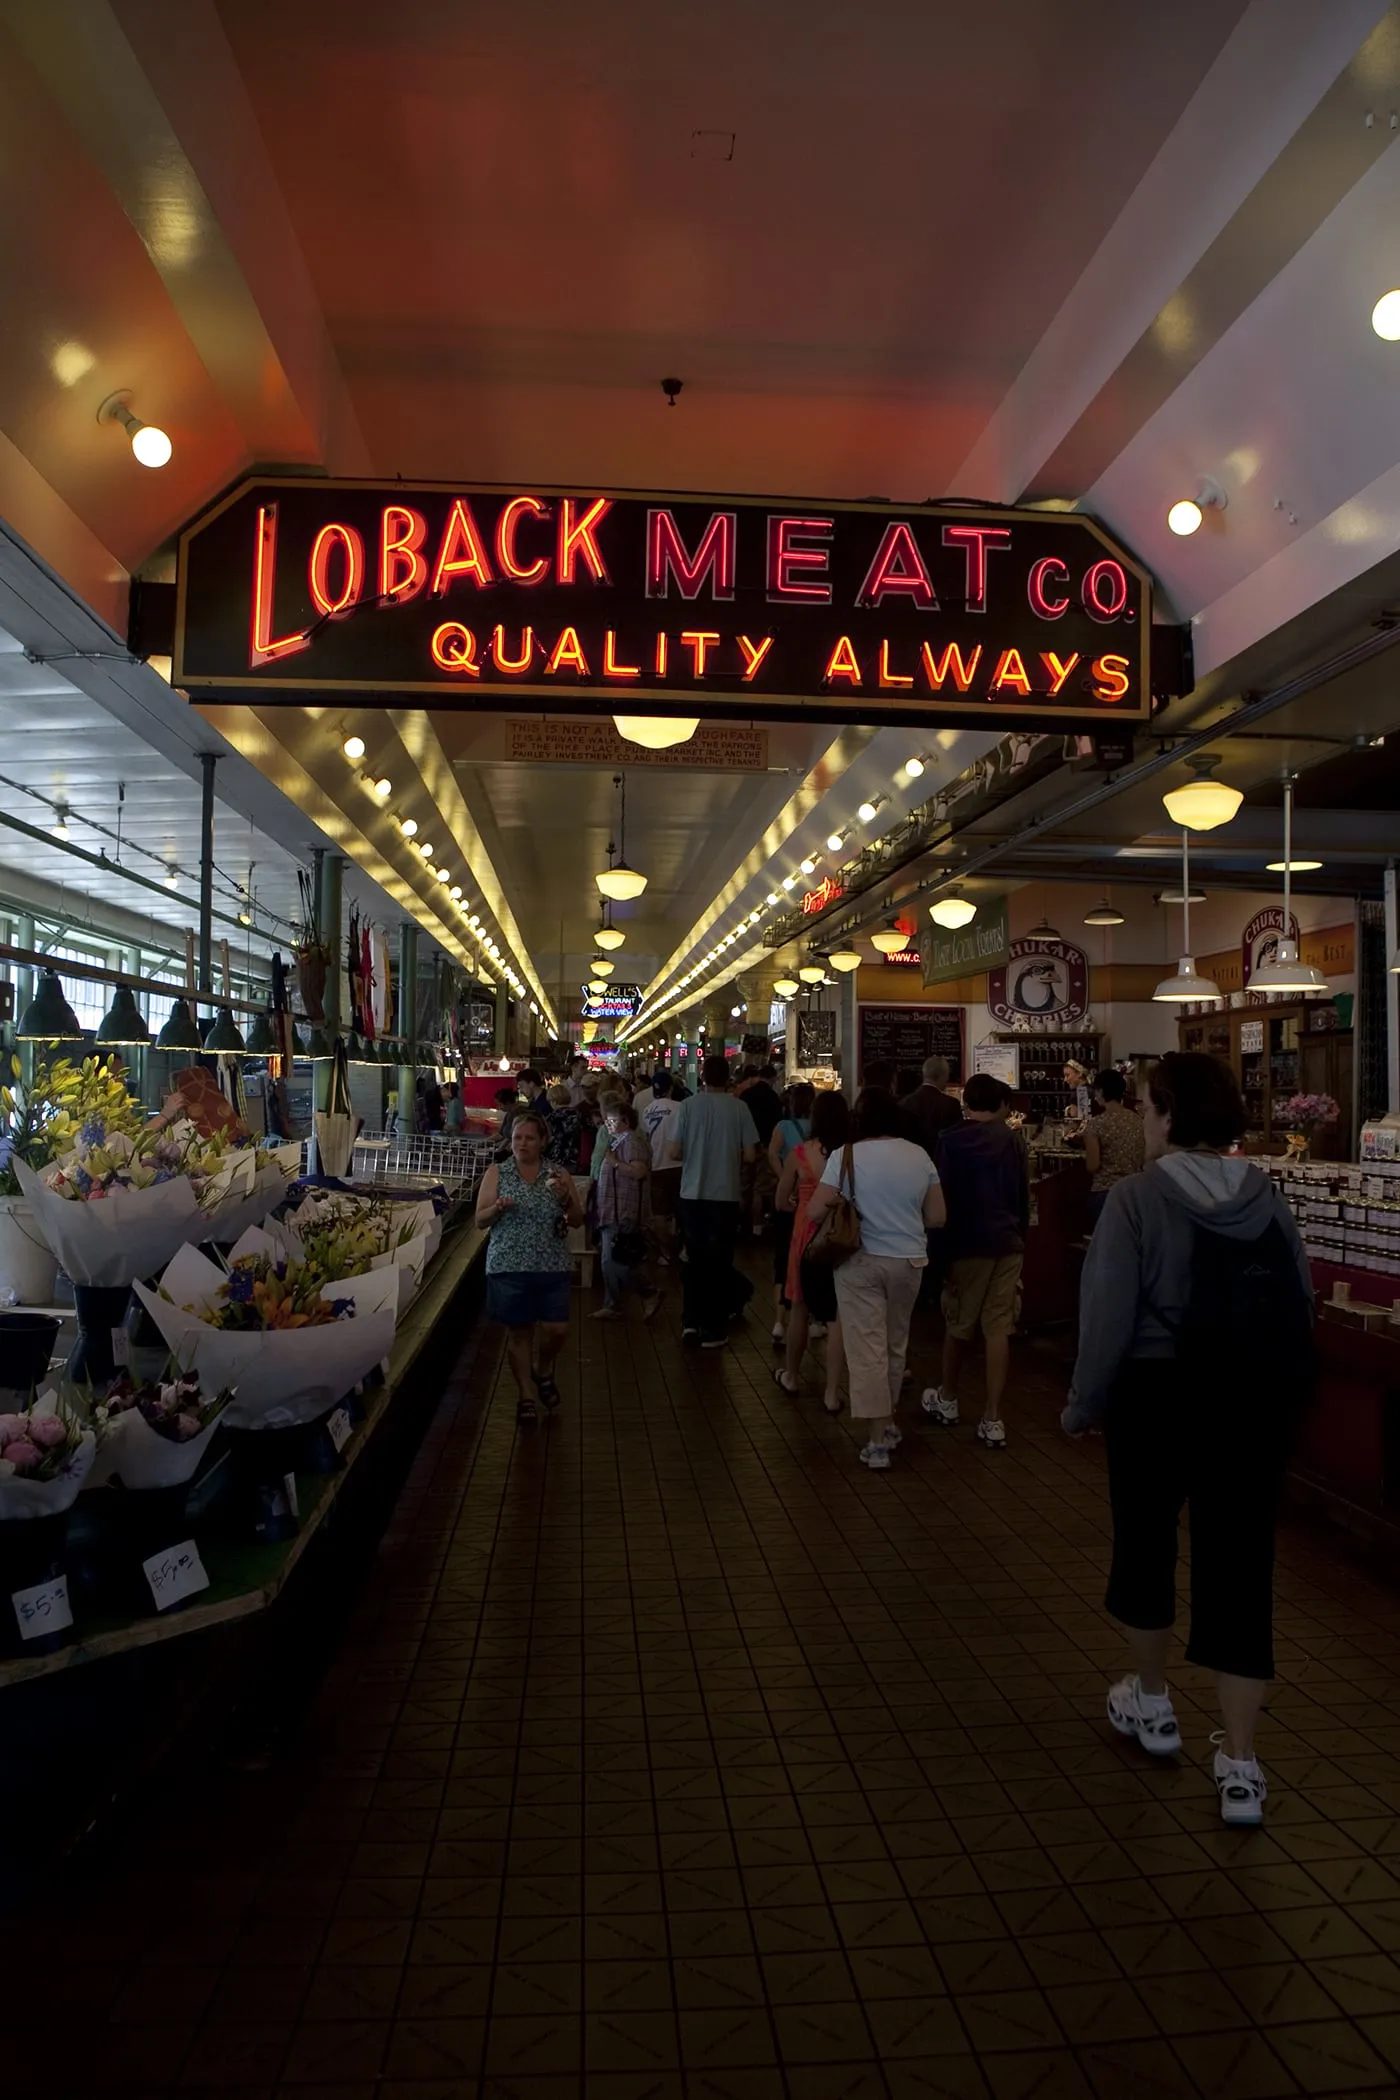 Loback Meat Co. at Pike Place Market in Seattle, Washington.